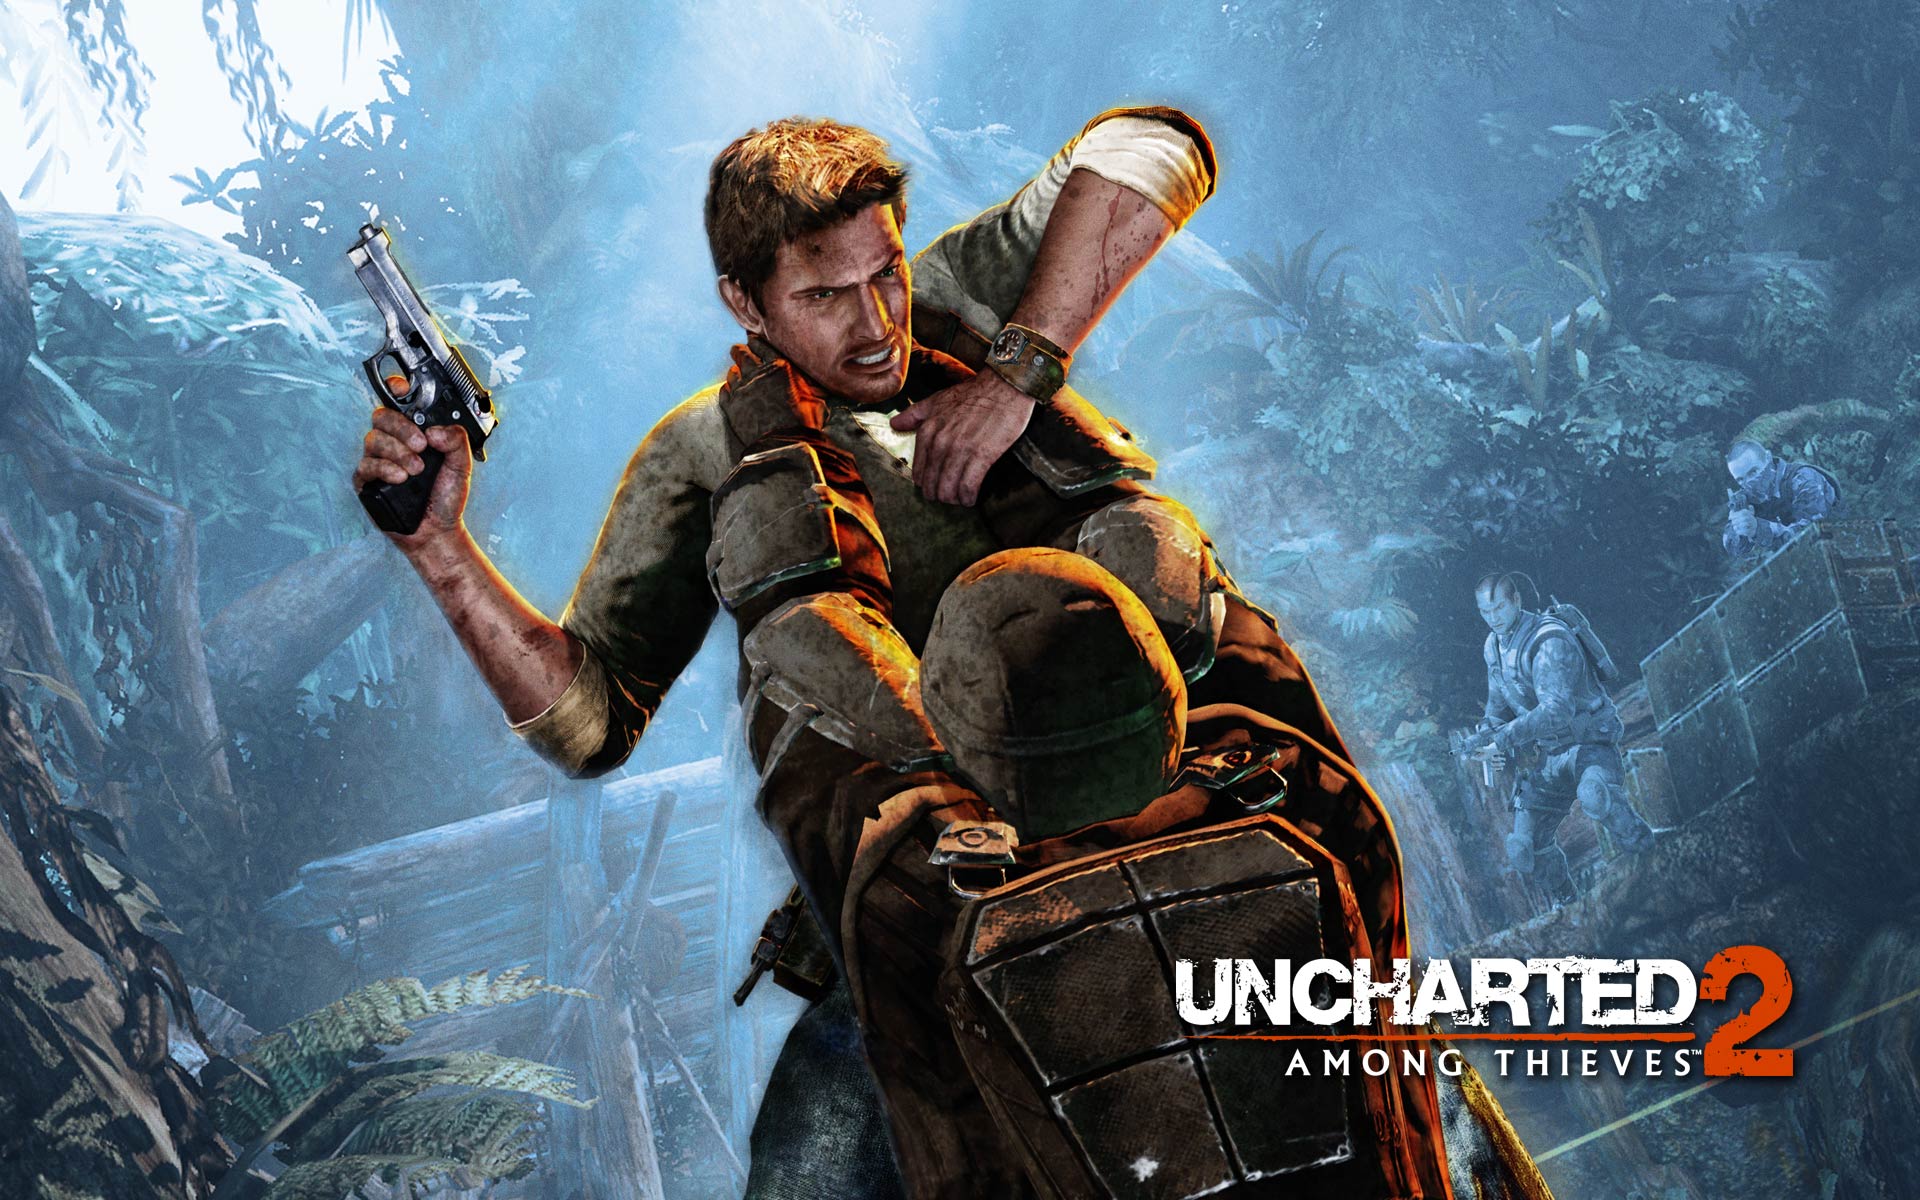 uncharted 2 free pc